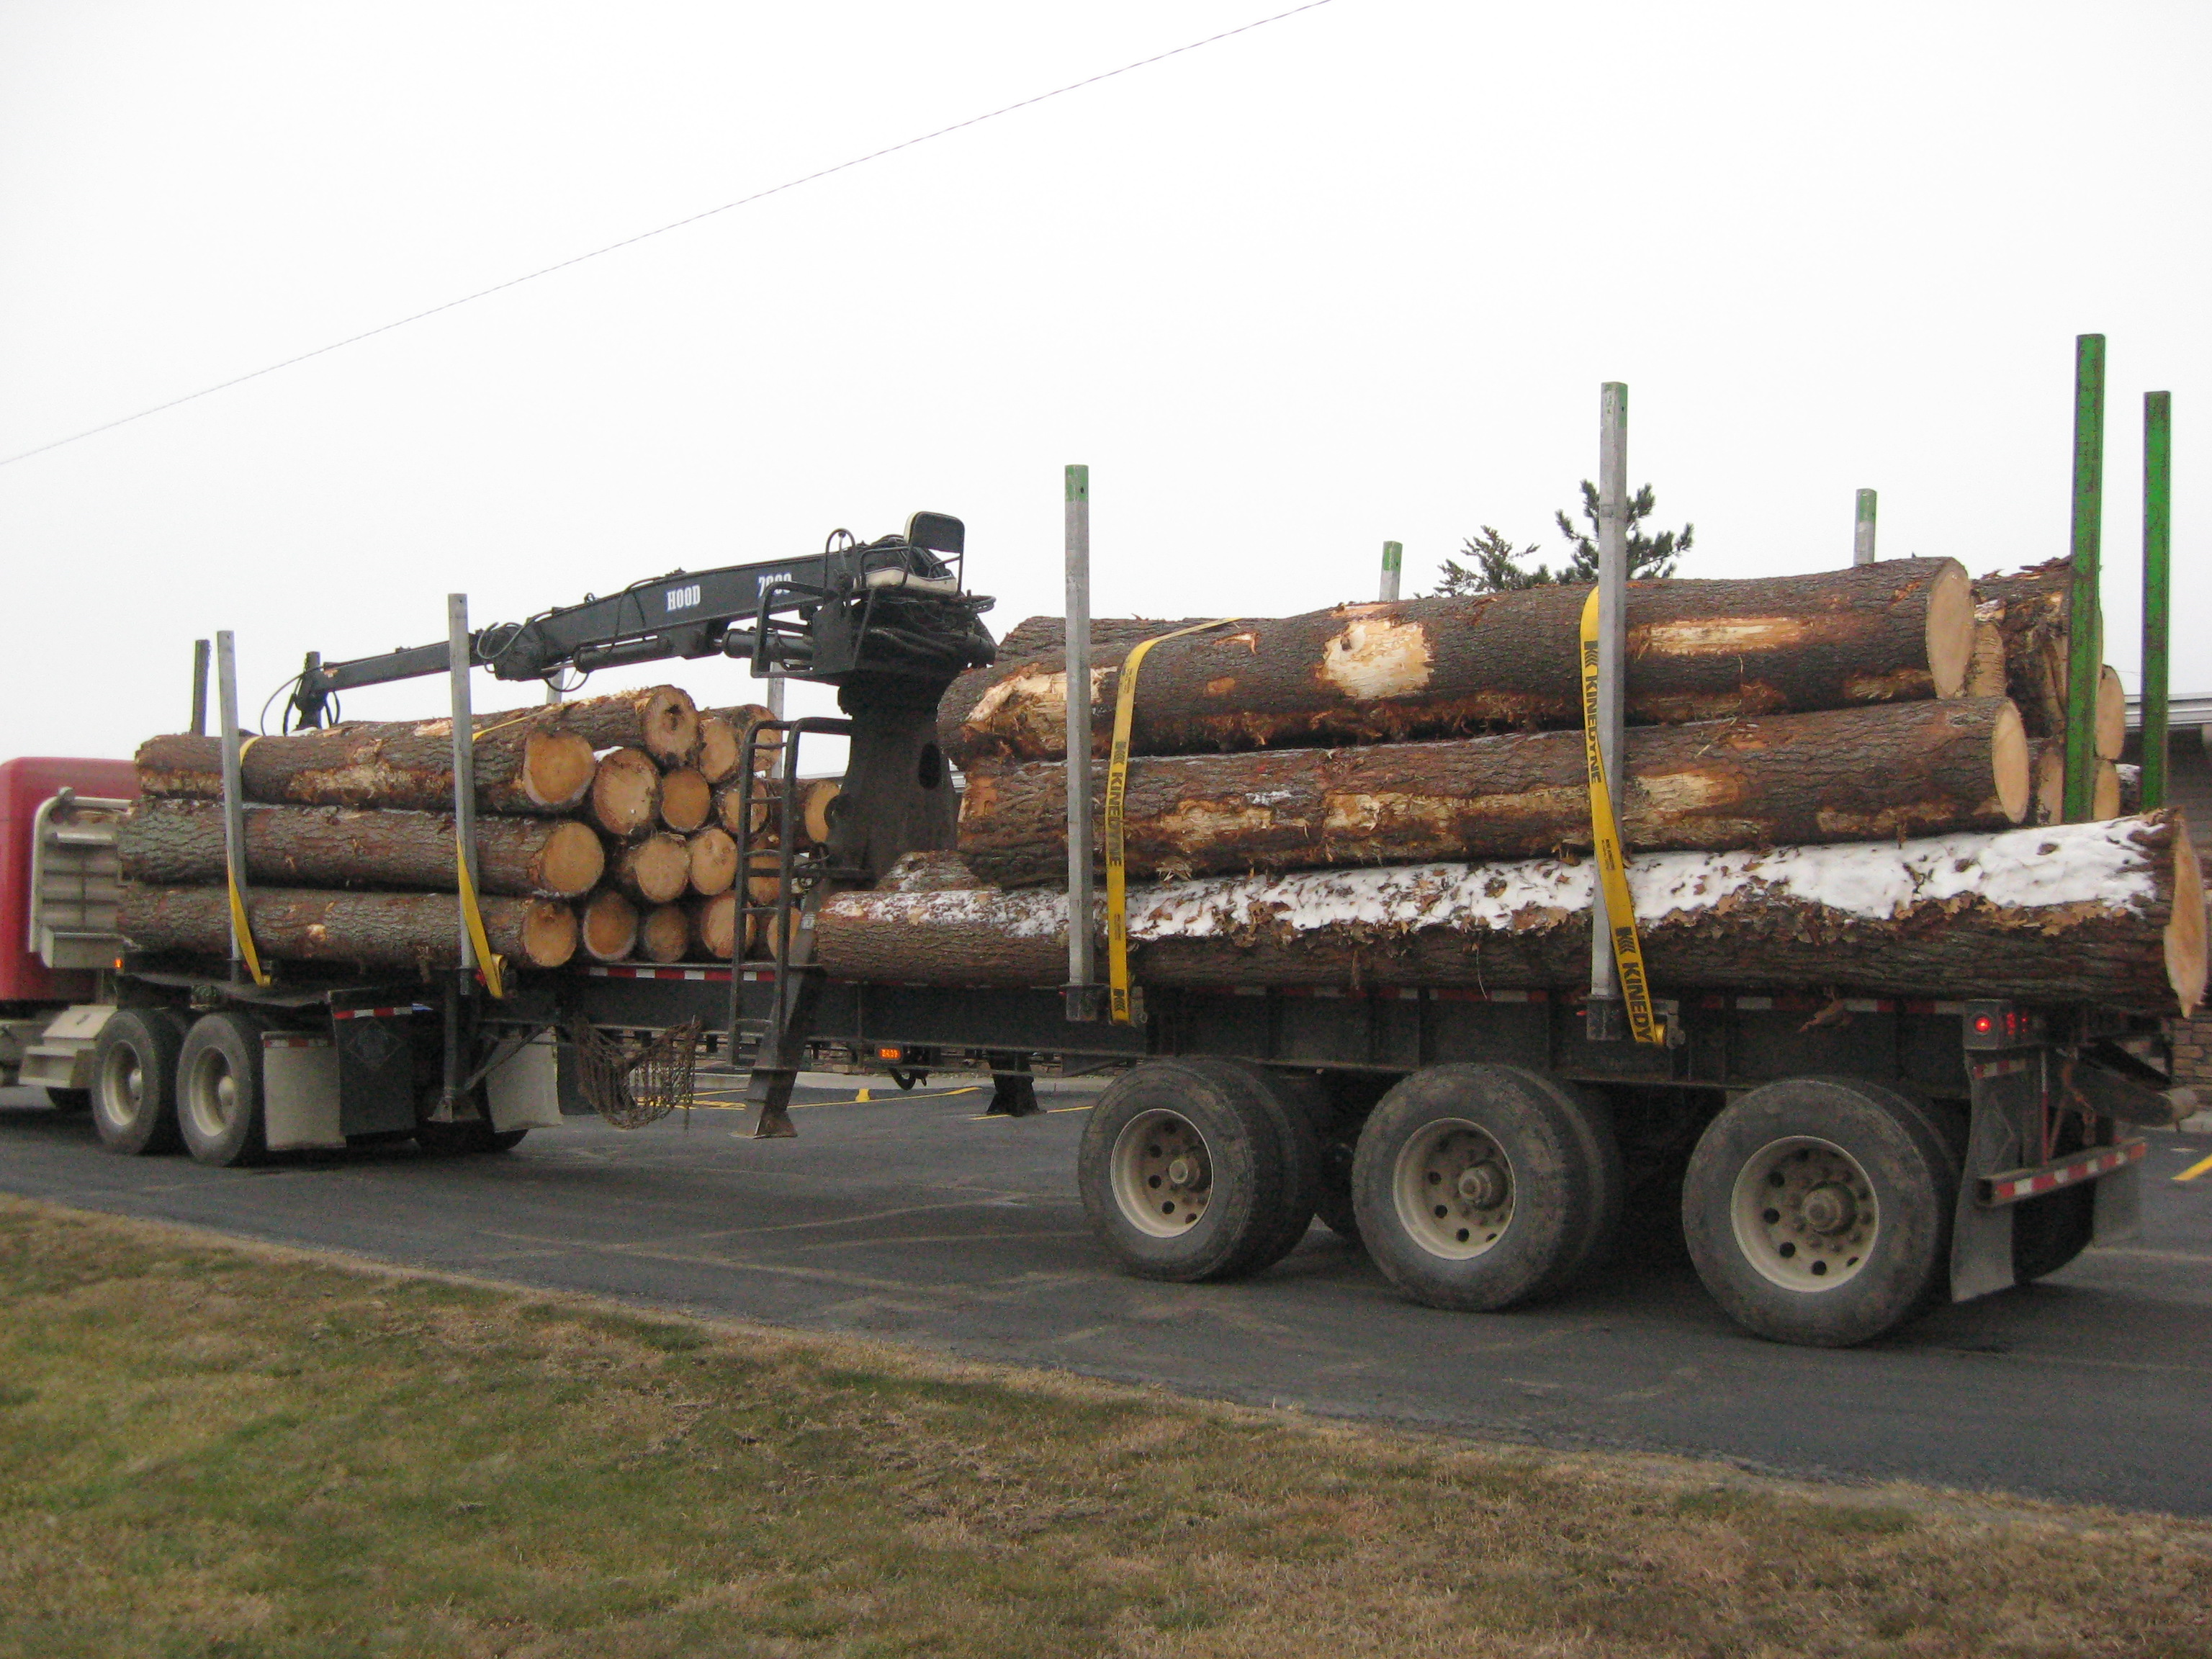 Pine logs from the harvest operation in 2018